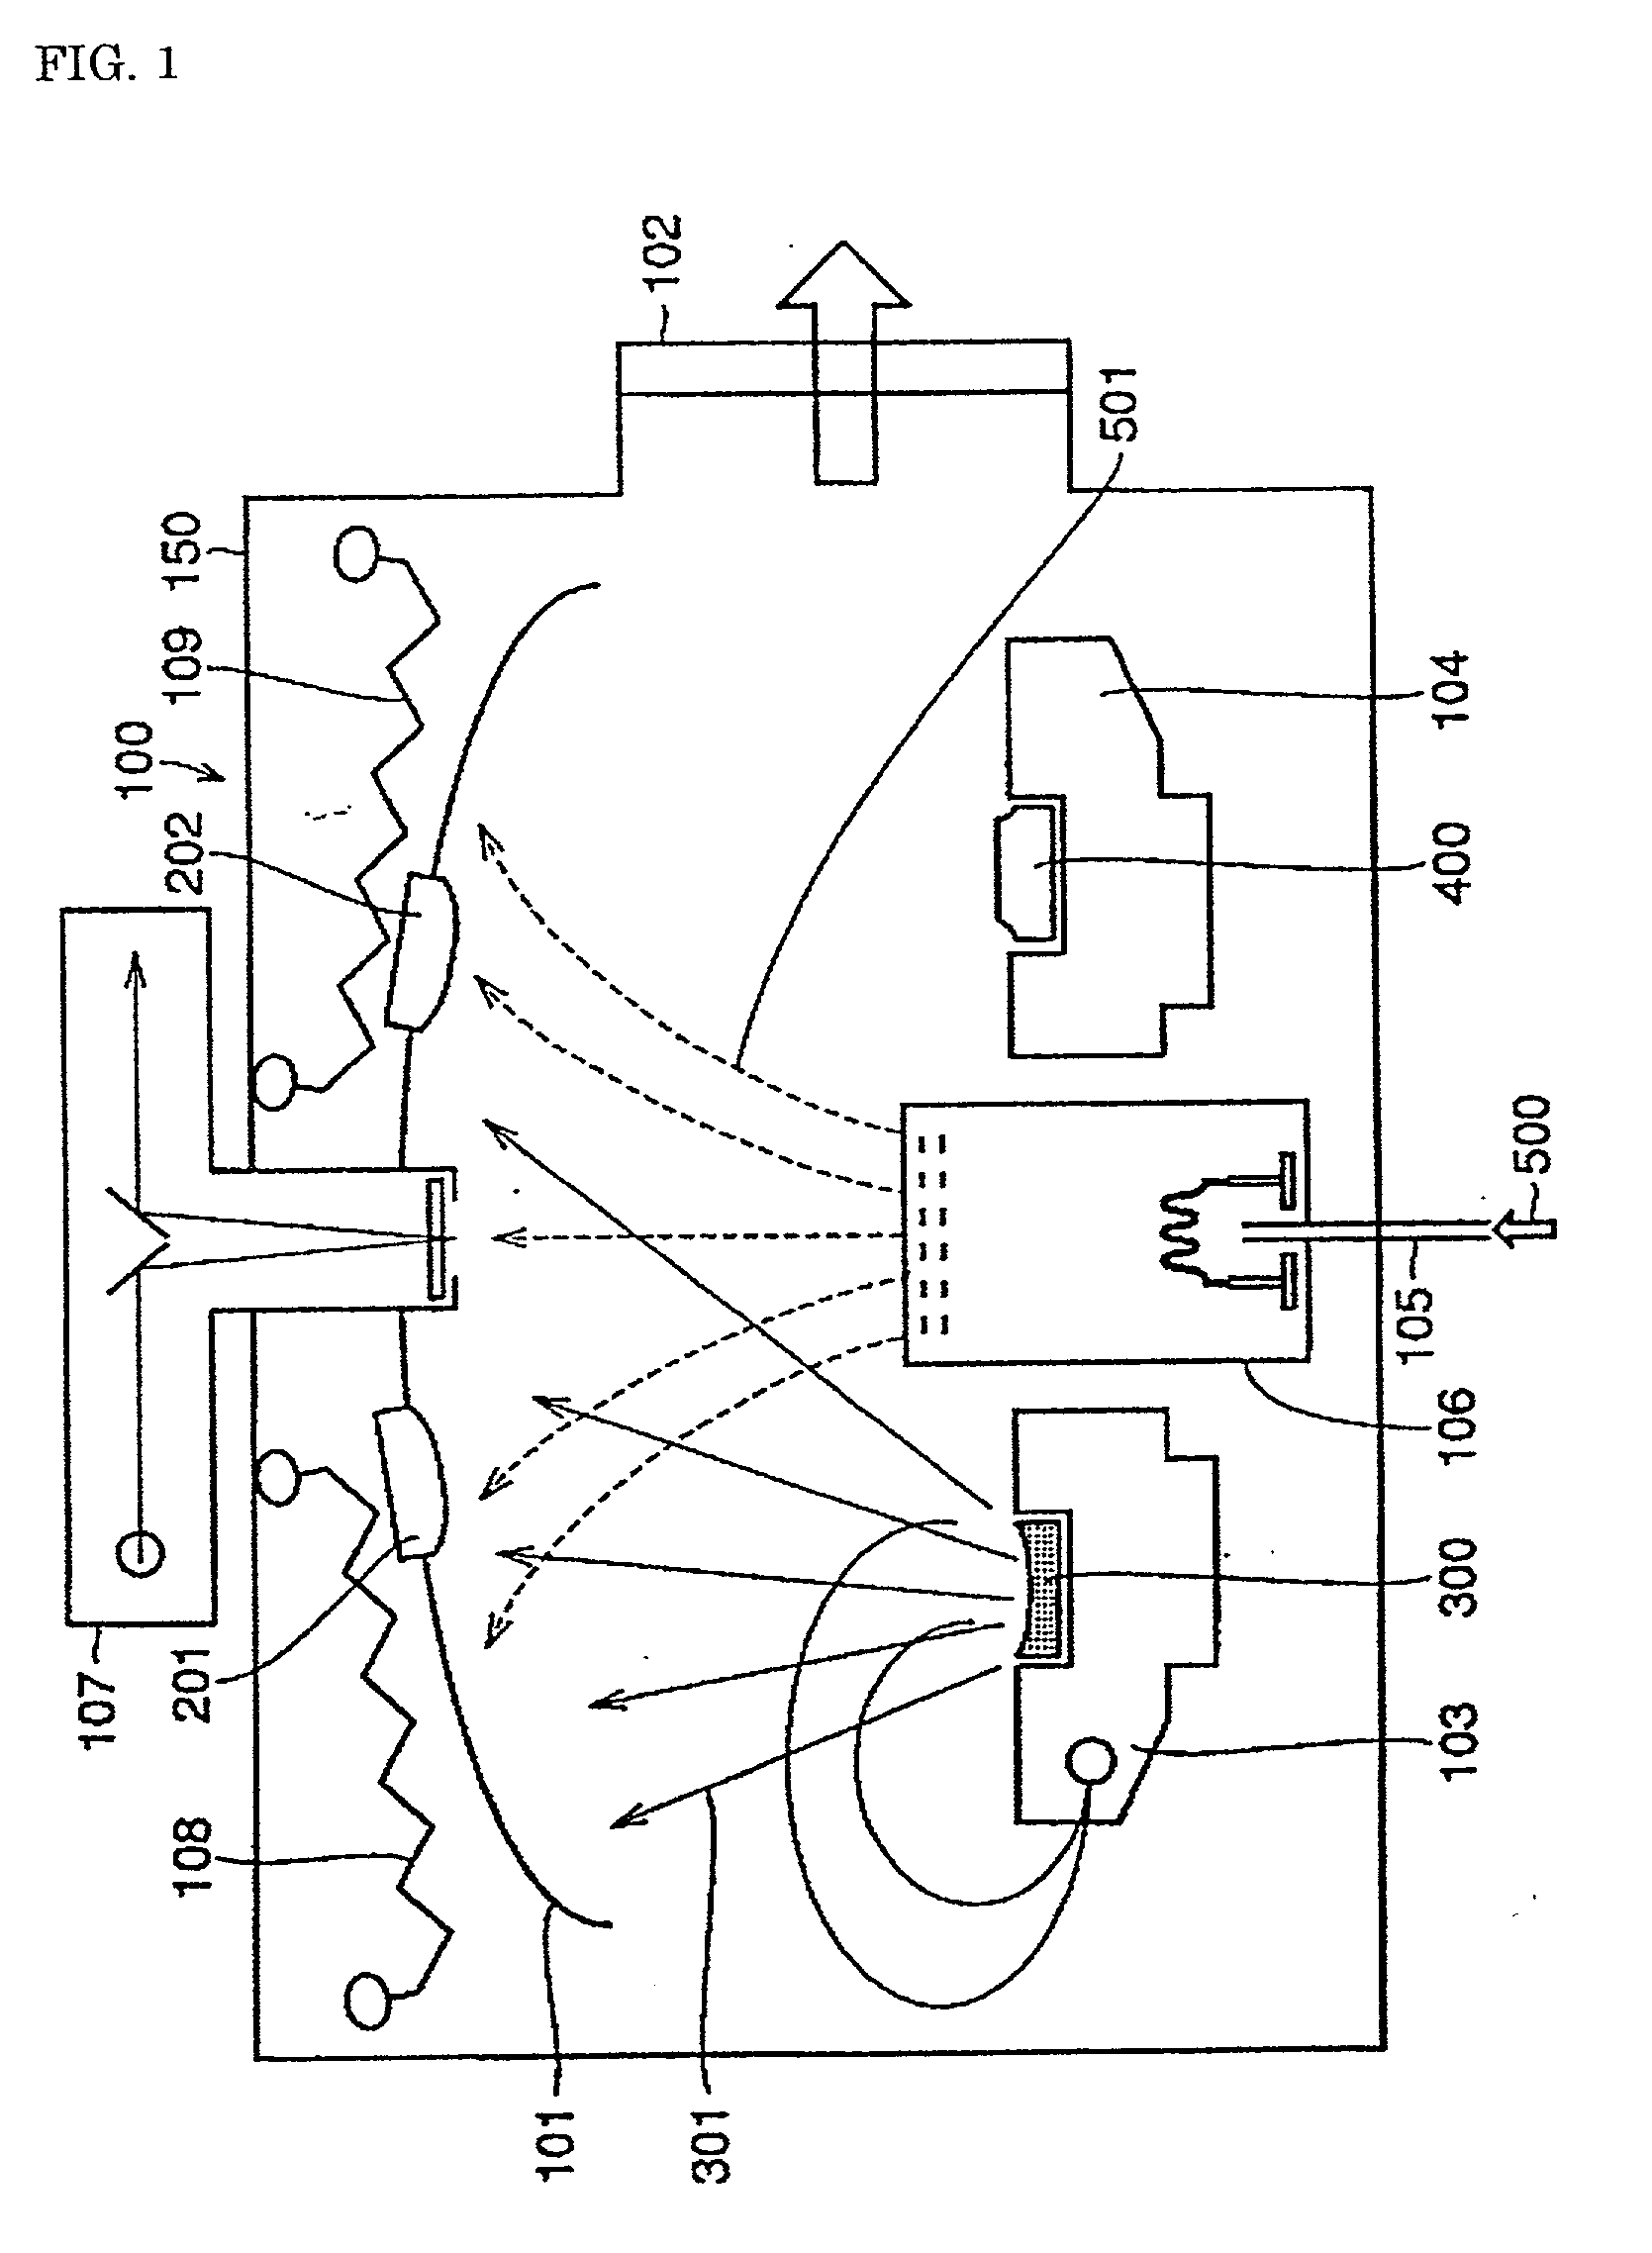 Infrared laser optical element and manufacturing method therefor